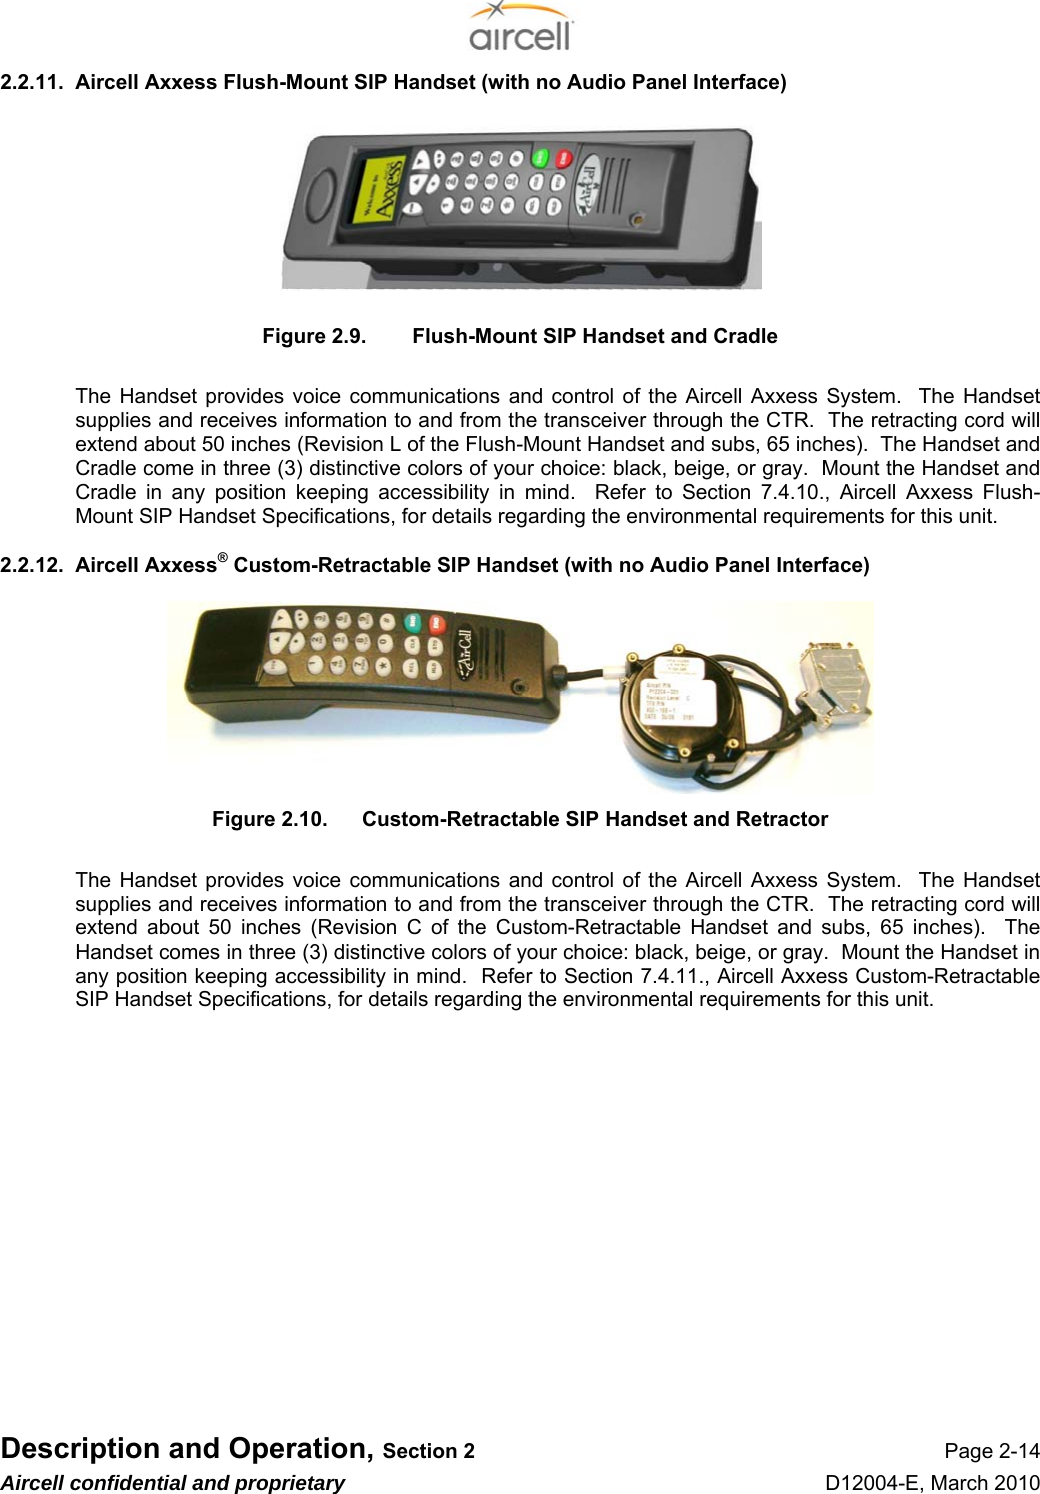  Description and Operation, Section 2 Page 2-14 Aircell confidential and proprietary D12004-E, March 2010 2.2.11.  Aircell Axxess Flush-Mount SIP Handset (with no Audio Panel Interface)        Figure 2.9.  Flush-Mount SIP Handset and Cradle  The Handset provides voice communications and control of the Aircell Axxess System.  The Handset supplies and receives information to and from the transceiver through the CTR.  The retracting cord will extend about 50 inches (Revision L of the Flush-Mount Handset and subs, 65 inches).  The Handset and Cradle come in three (3) distinctive colors of your choice: black, beige, or gray.  Mount the Handset and Cradle in any position keeping accessibility in mind.  Refer to Section 7.4.10., Aircell Axxess Flush-Mount SIP Handset Specifications, for details regarding the environmental requirements for this unit. 2.2.12.  Aircell Axxess® Custom-Retractable SIP Handset (with no Audio Panel Interface)        Figure 2.10.  Custom-Retractable SIP Handset and Retractor  The Handset provides voice communications and control of the Aircell Axxess System.  The Handset supplies and receives information to and from the transceiver through the CTR.  The retracting cord will extend about 50 inches (Revision C of the Custom-Retractable Handset and subs, 65 inches).  The Handset comes in three (3) distinctive colors of your choice: black, beige, or gray.  Mount the Handset in any position keeping accessibility in mind.  Refer to Section 7.4.11., Aircell Axxess Custom-Retractable SIP Handset Specifications, for details regarding the environmental requirements for this unit.              